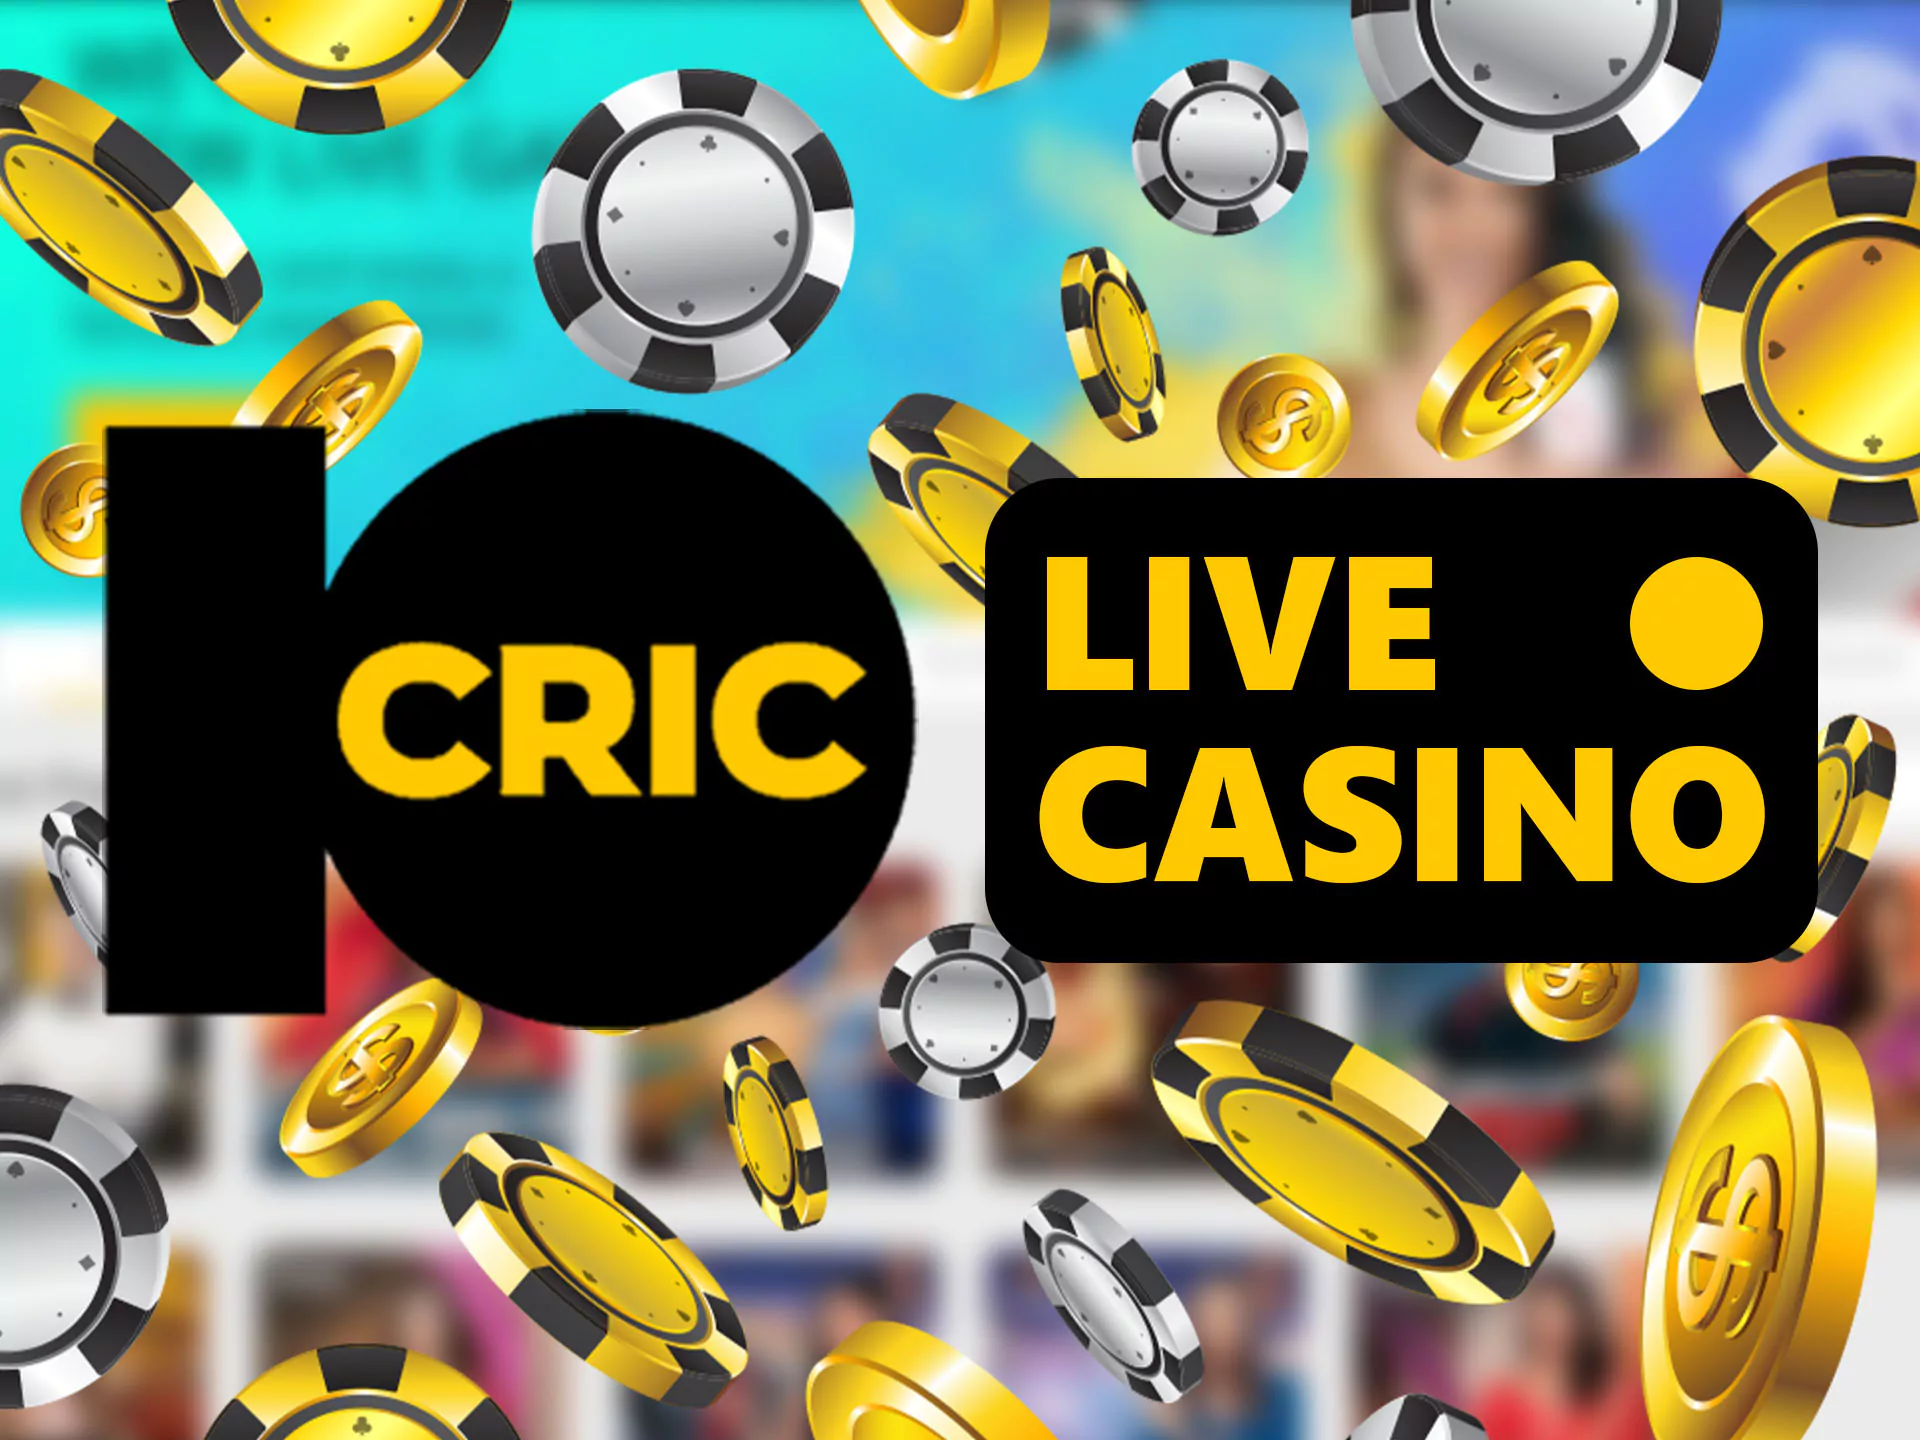 10Cric casino are completely legal in India.